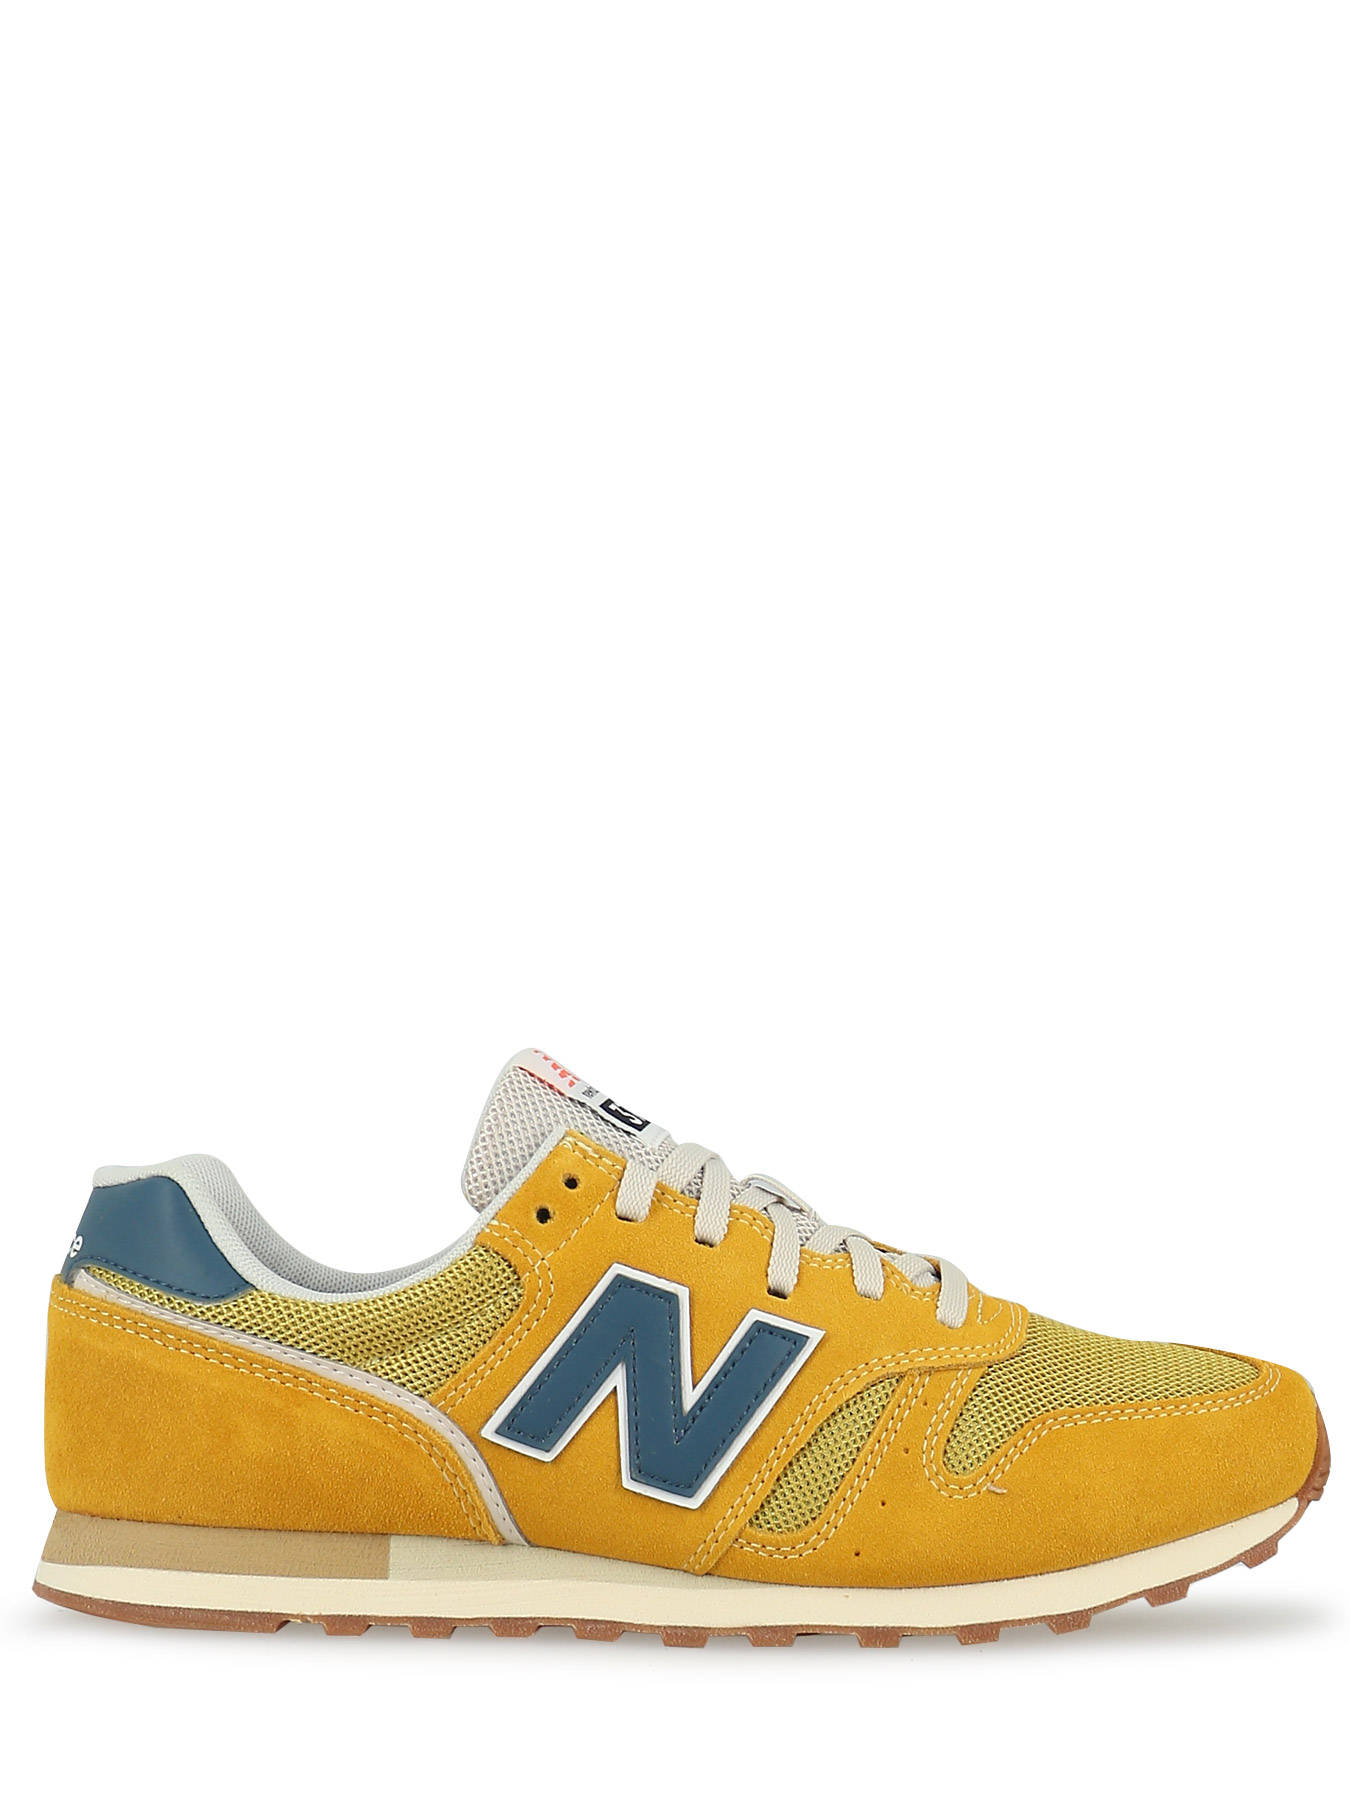 New Balance Sneakers ML373.HG2 - best prices